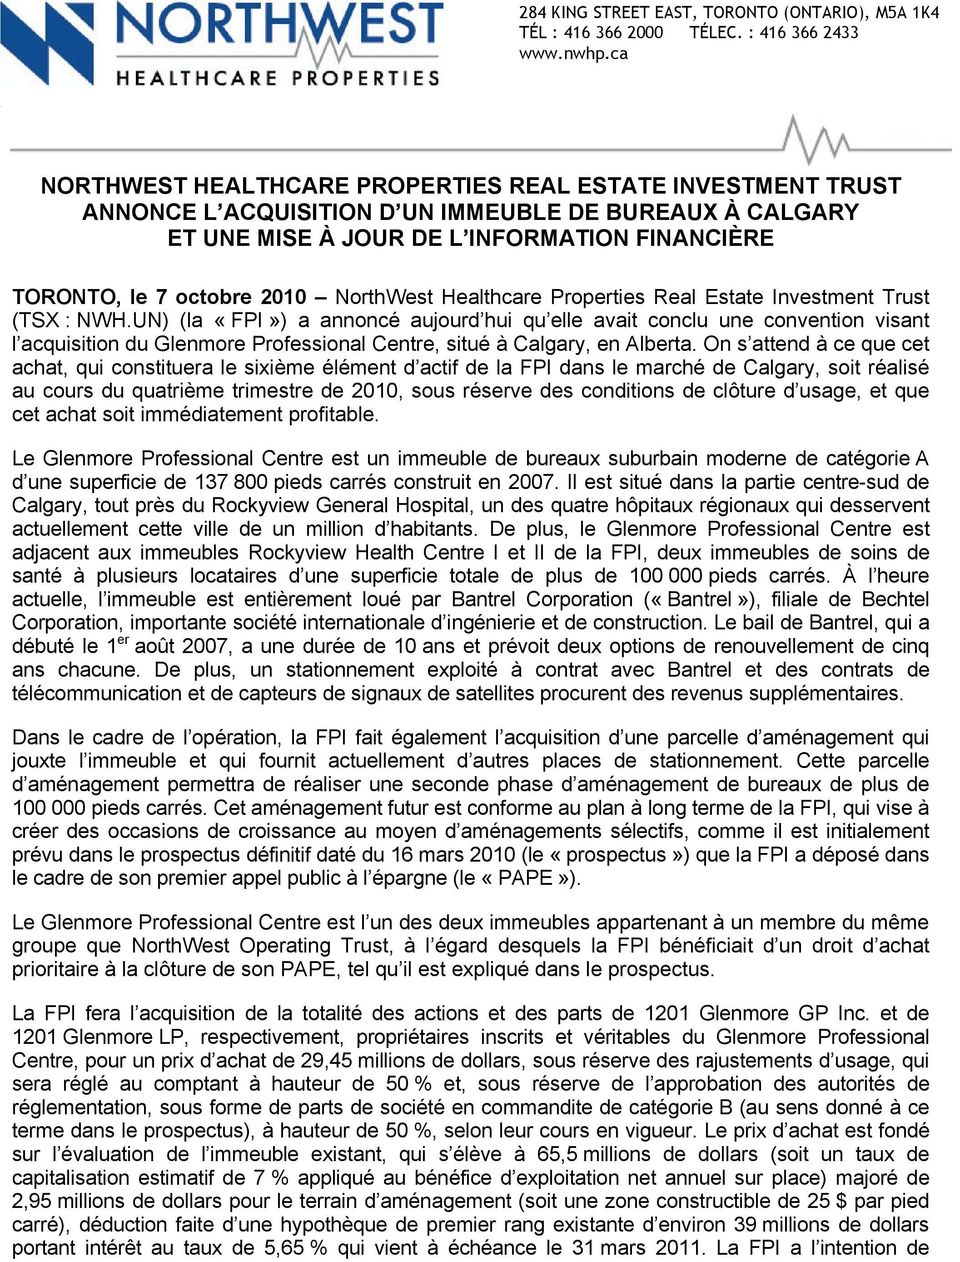 NorthWest Healthcare Properties Real Estate Investment Trust (TSX : NWH.